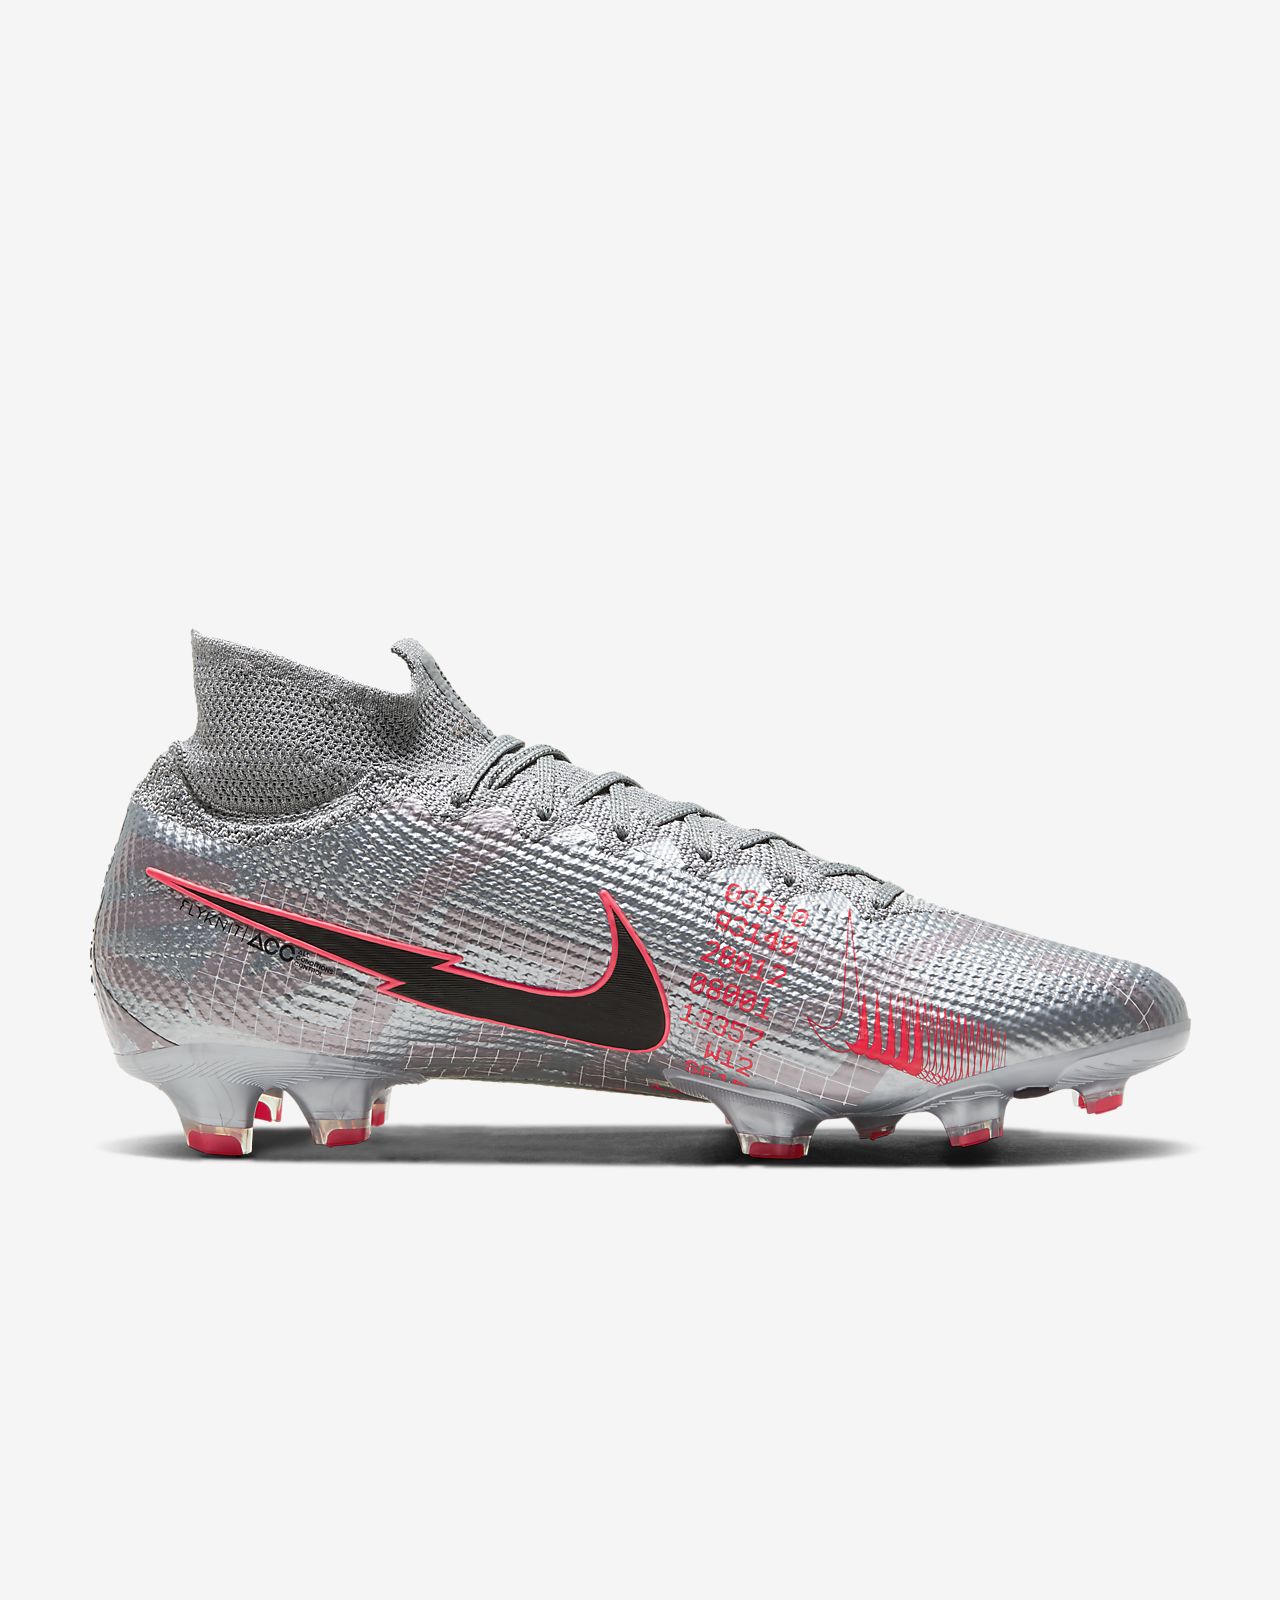 Mercurial Superfly VI 360 Elite Filtered Official Plate Goal